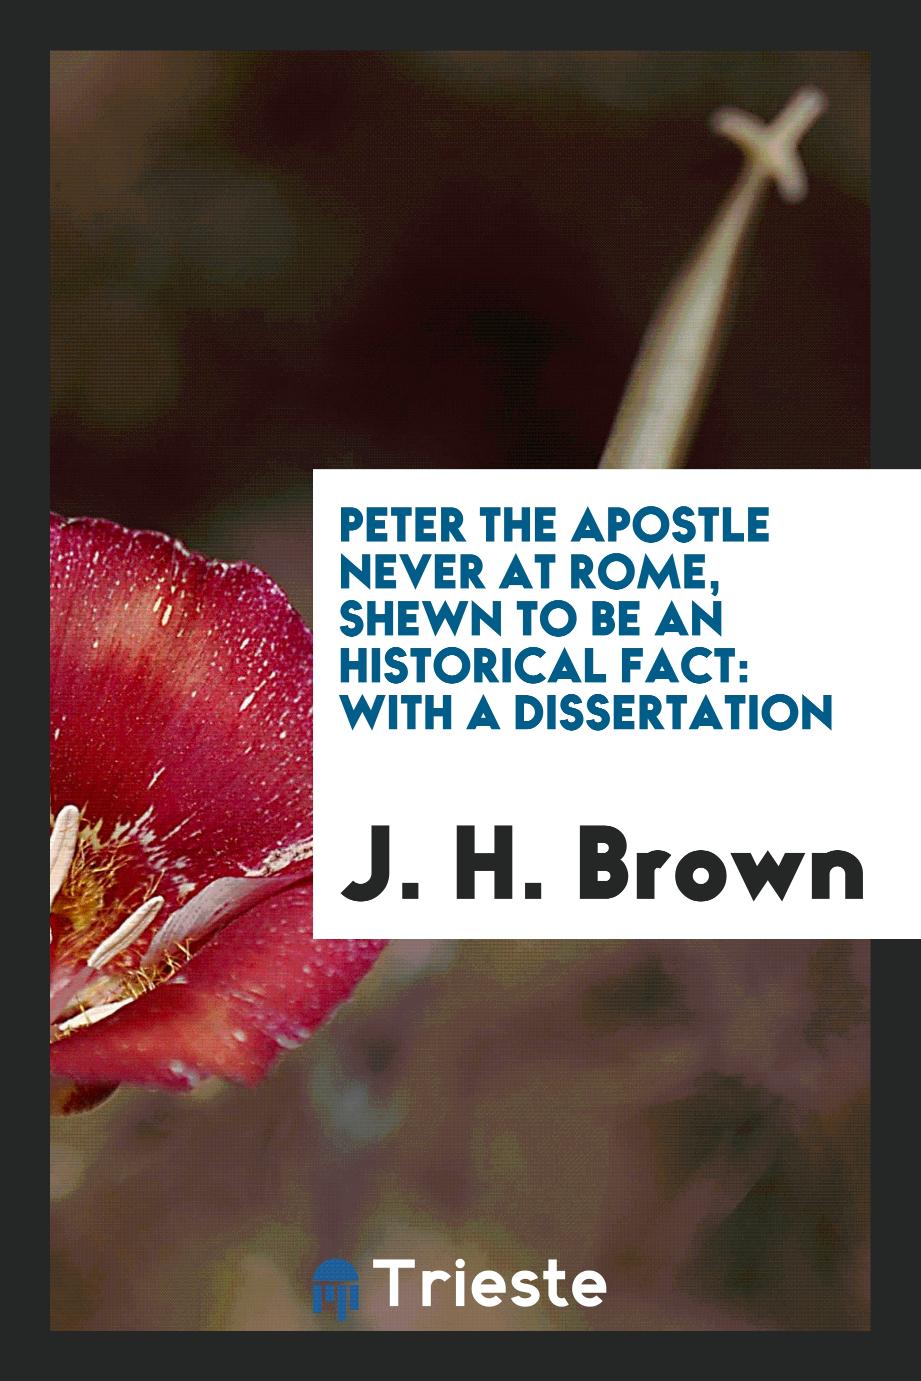 Peter the Apostle Never at Rome, Shewn to be an Historical Fact: With a Dissertation